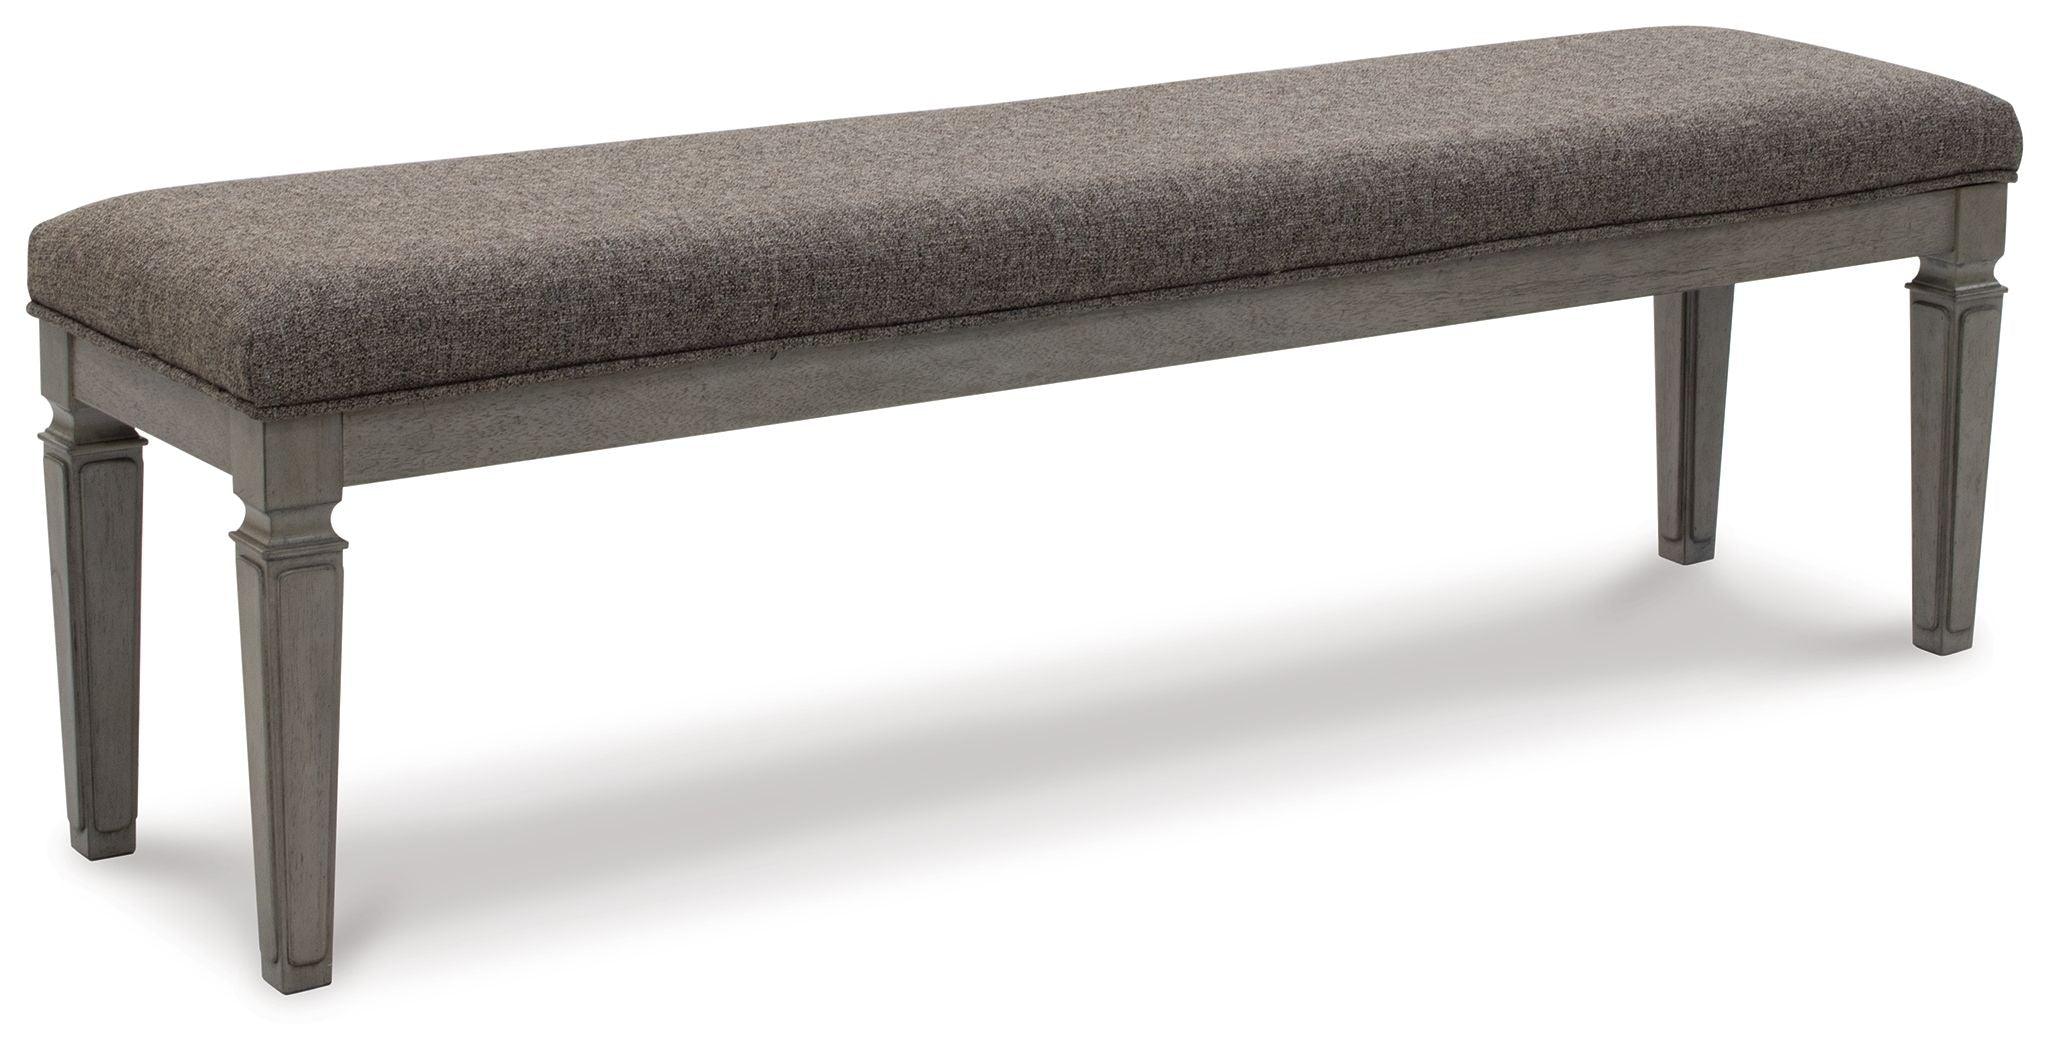 Signature Design by Ashley® - Lexorne - Gray - Large Uph Dining Room Bench - 5th Avenue Furniture